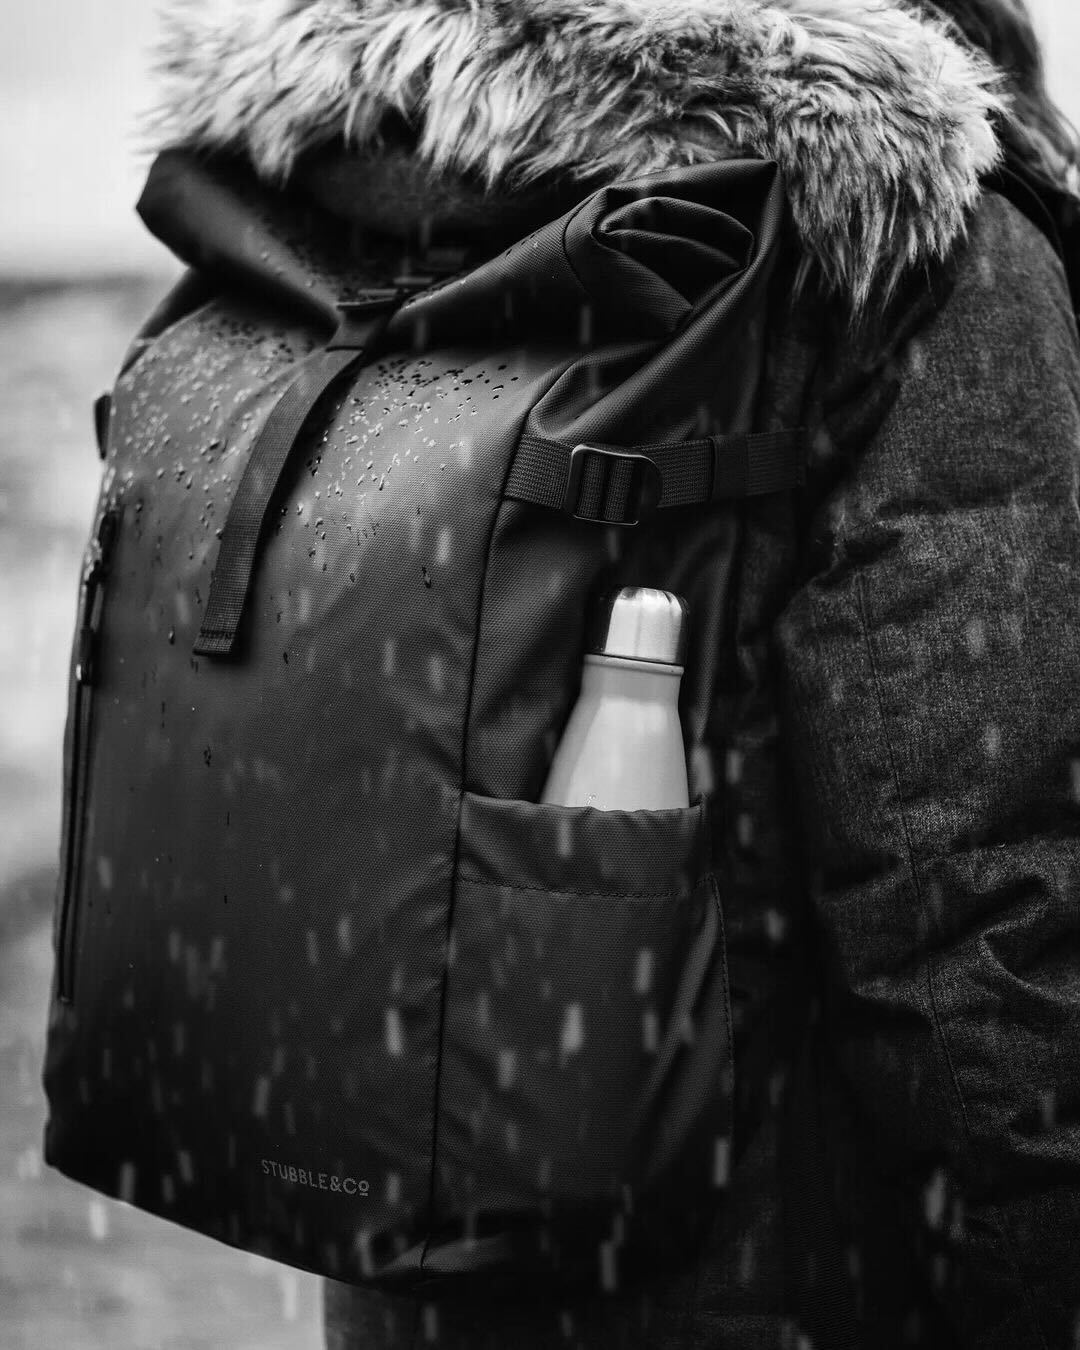 Close up of a person wearing a Black Roll Top backpack in the rain